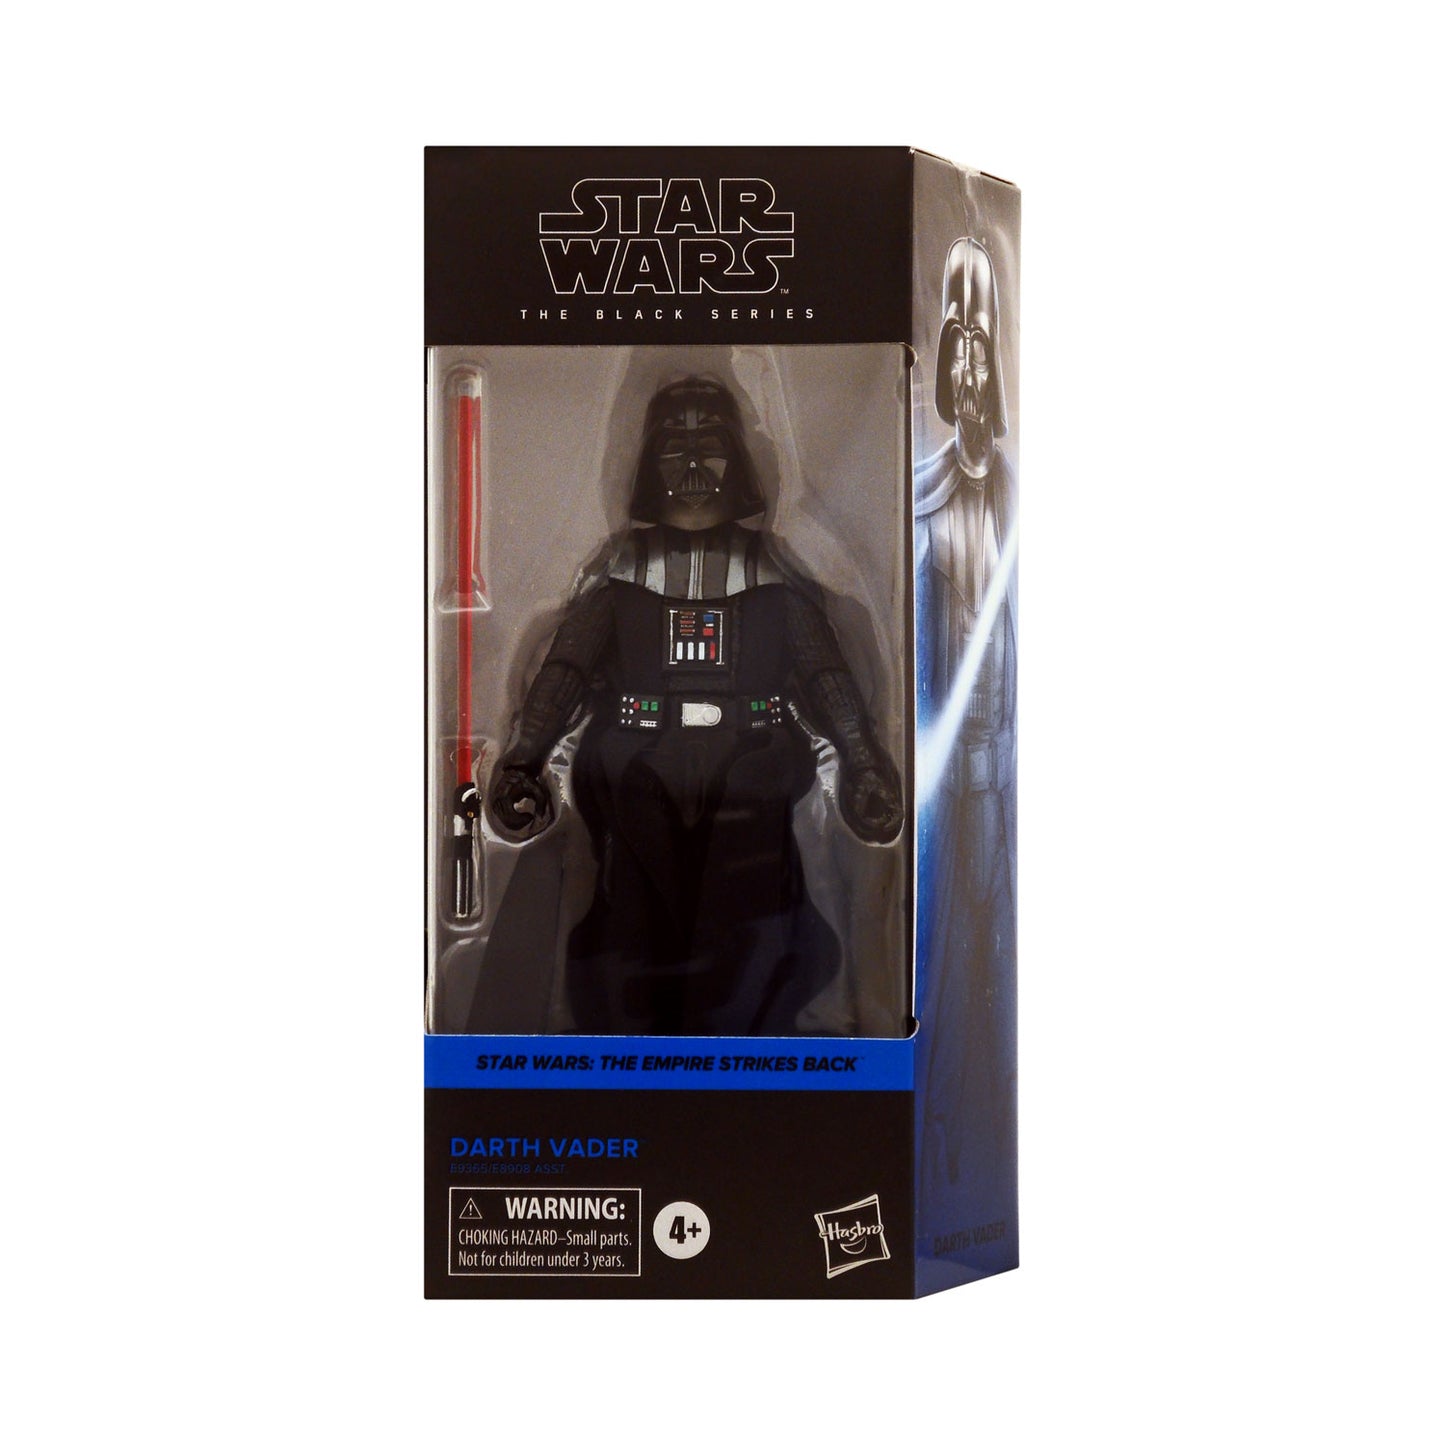 Star Wars: The Black Series Darth Vader 6-Inch Action Figure from Star Wars: The Empire Strikes Back